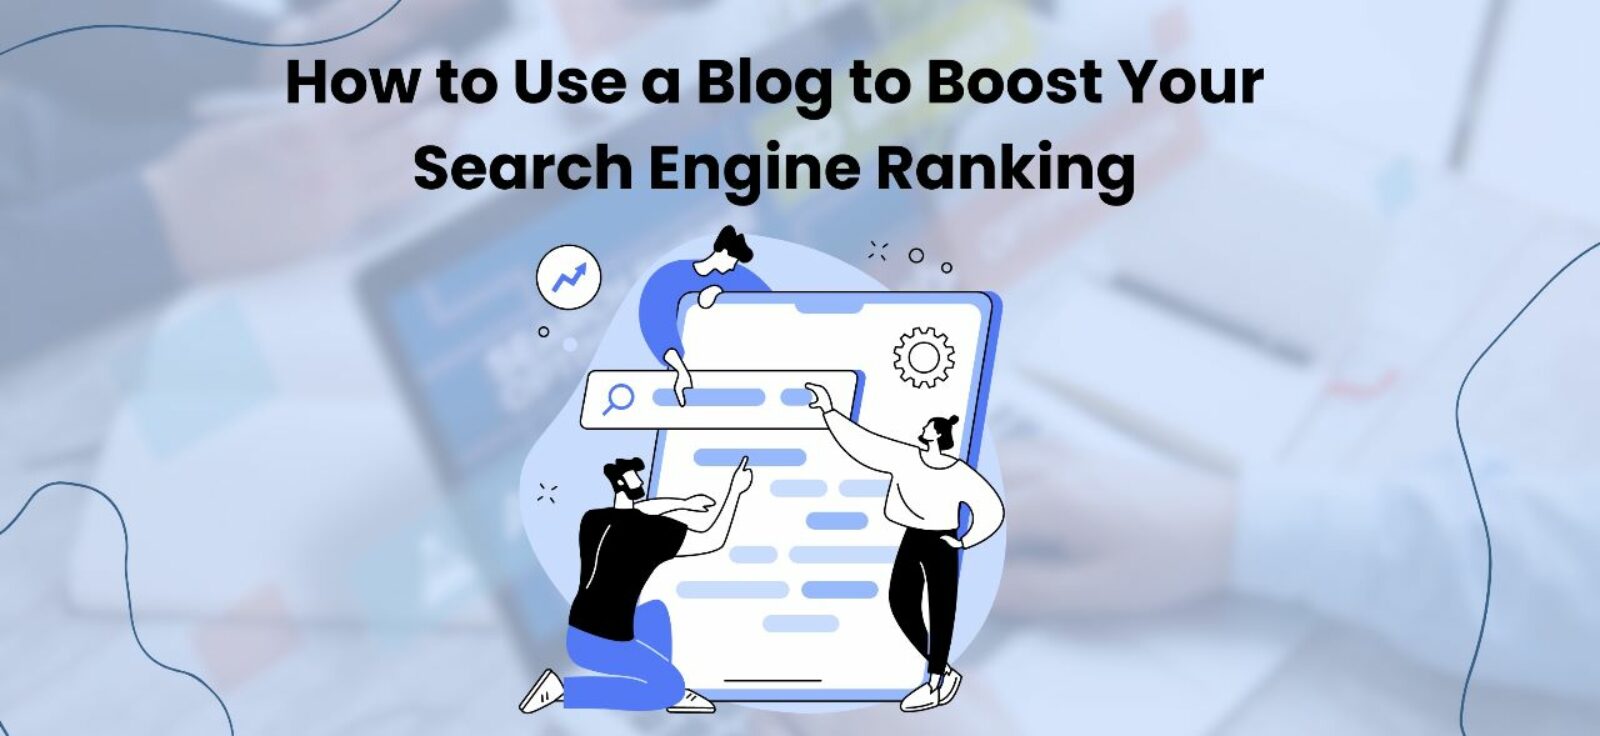 Boost Your Search Engine Ranking